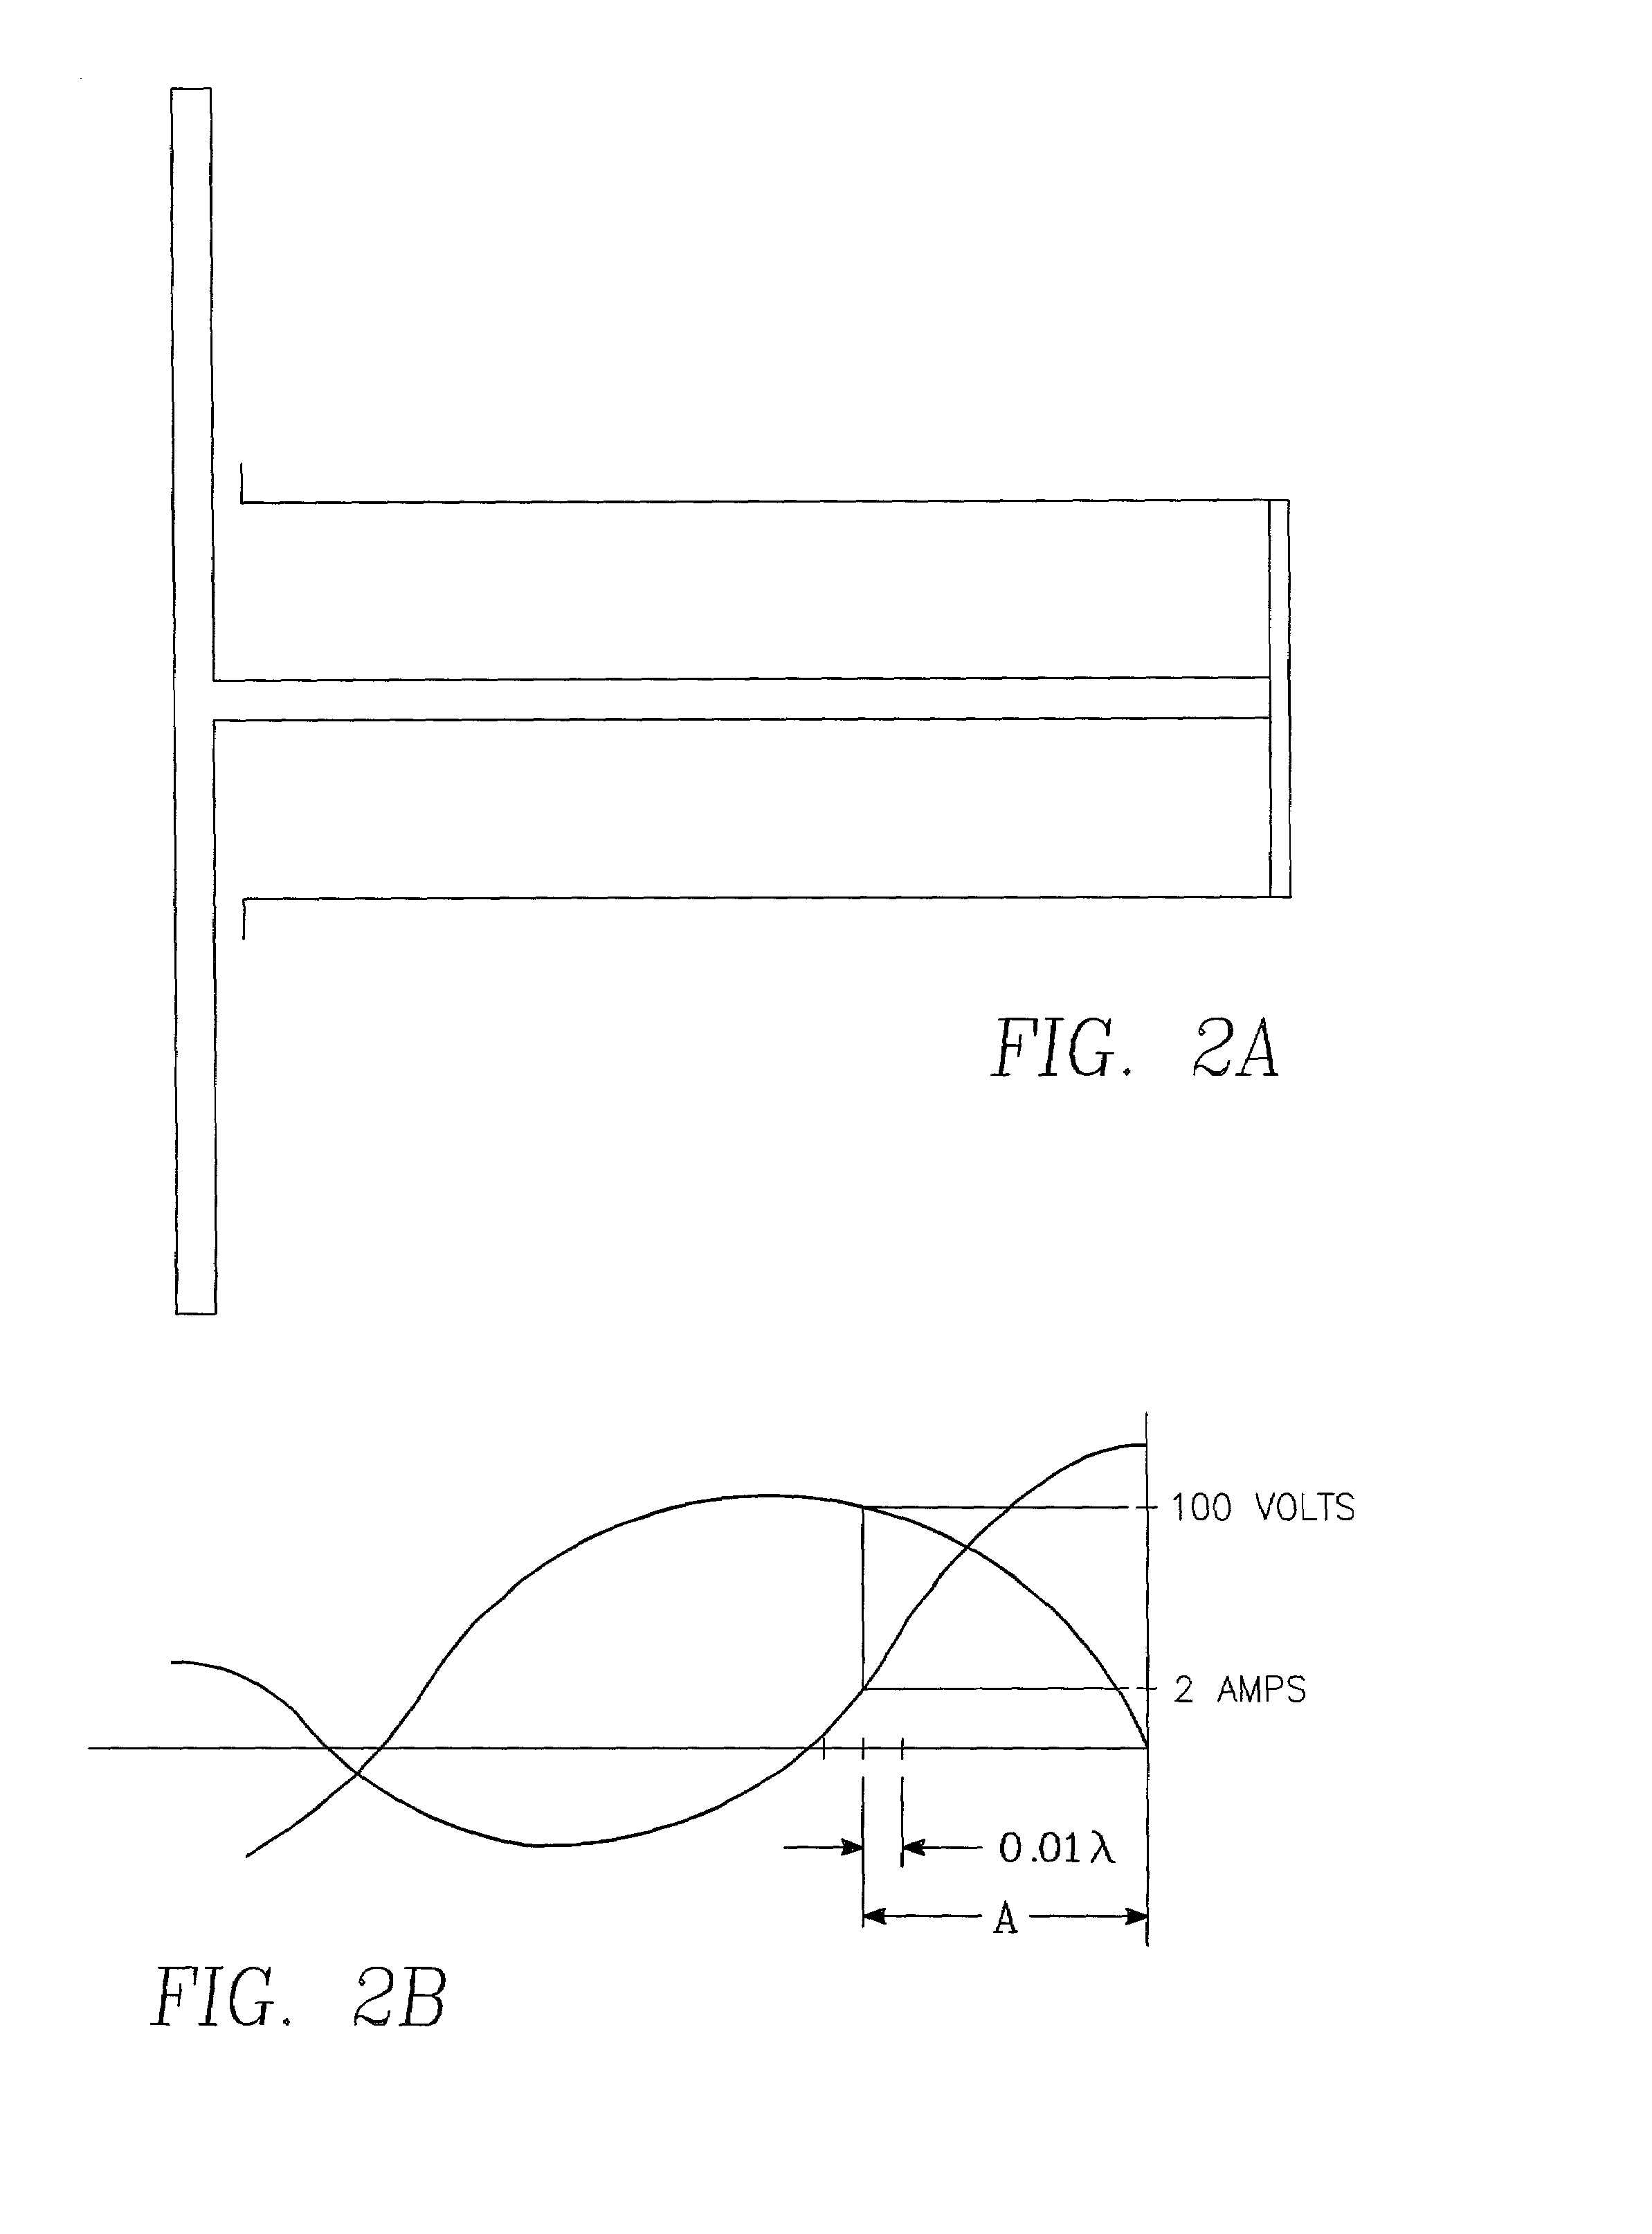 Plasma reactor with overhead RF electrode tuned to the plasma with arcing suppression